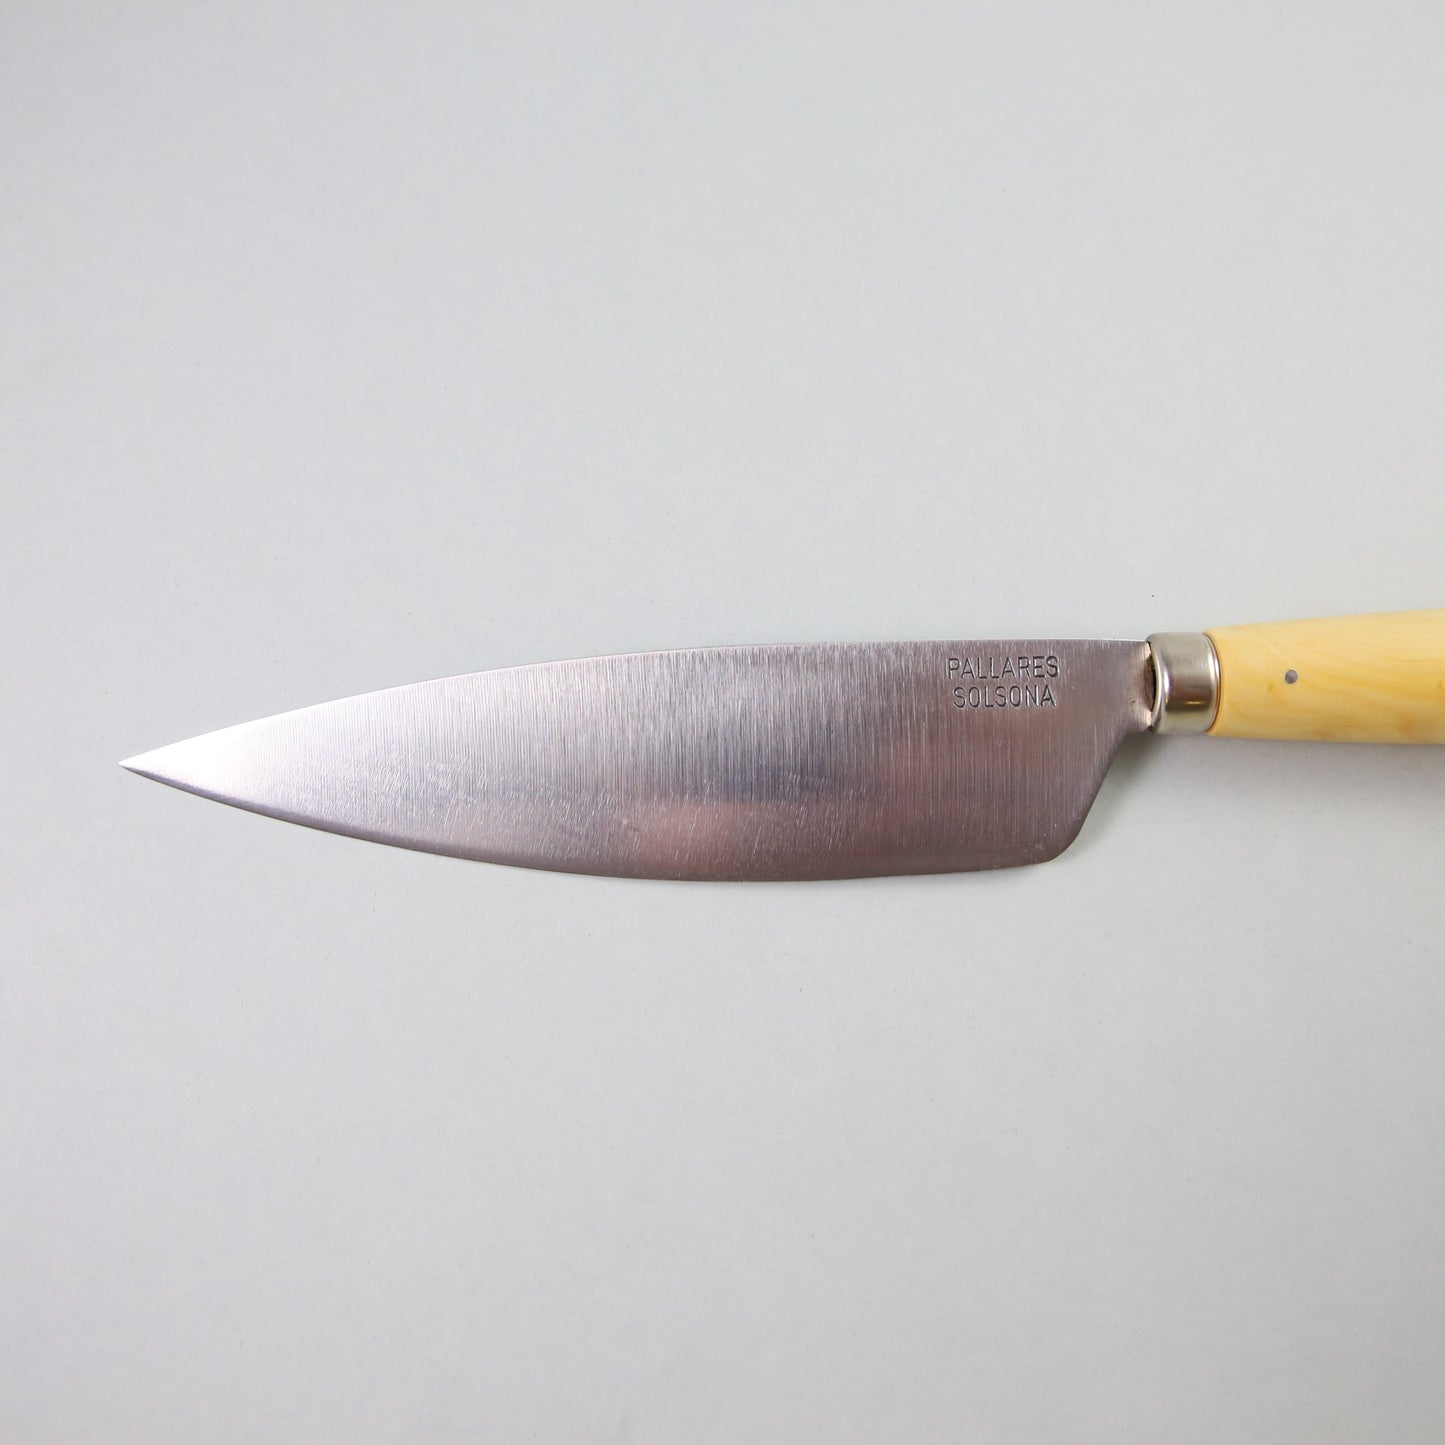 Pallares Carbon Steel Chef's Knife